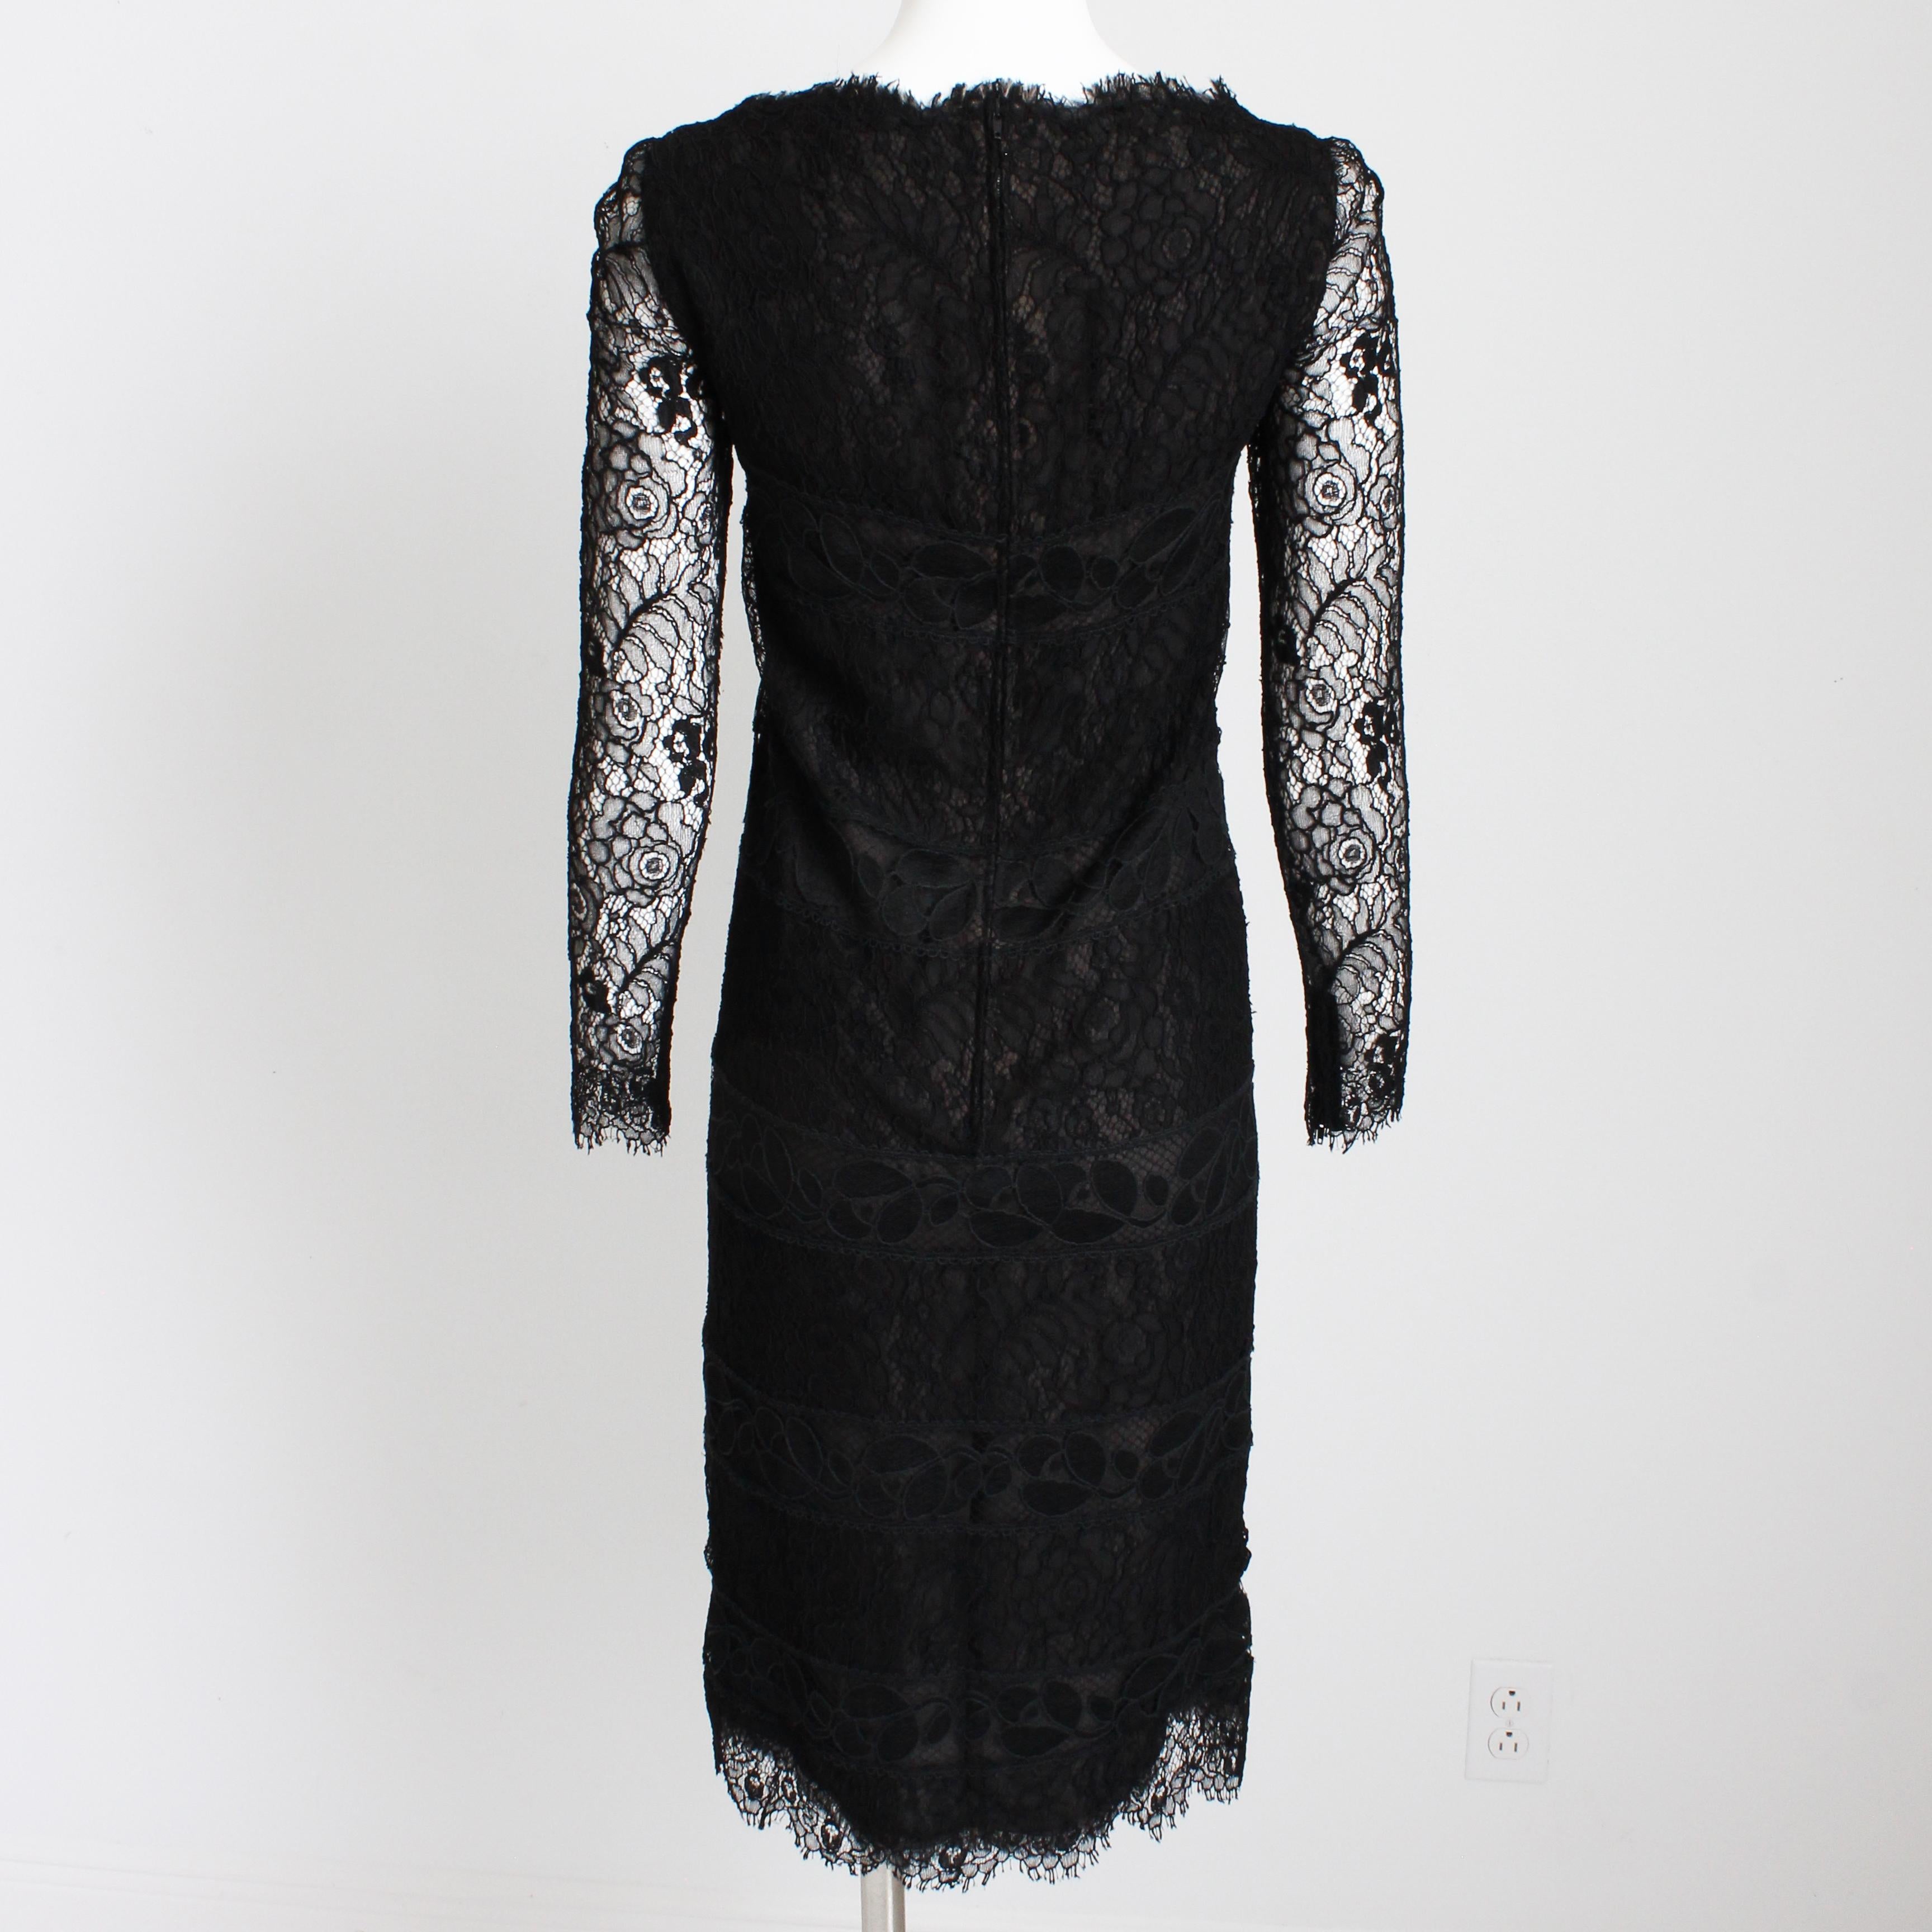 Chanel Couture Cocktail Dress Black Silk Guipure Lace Floral Numbered Vintage  For Sale 4